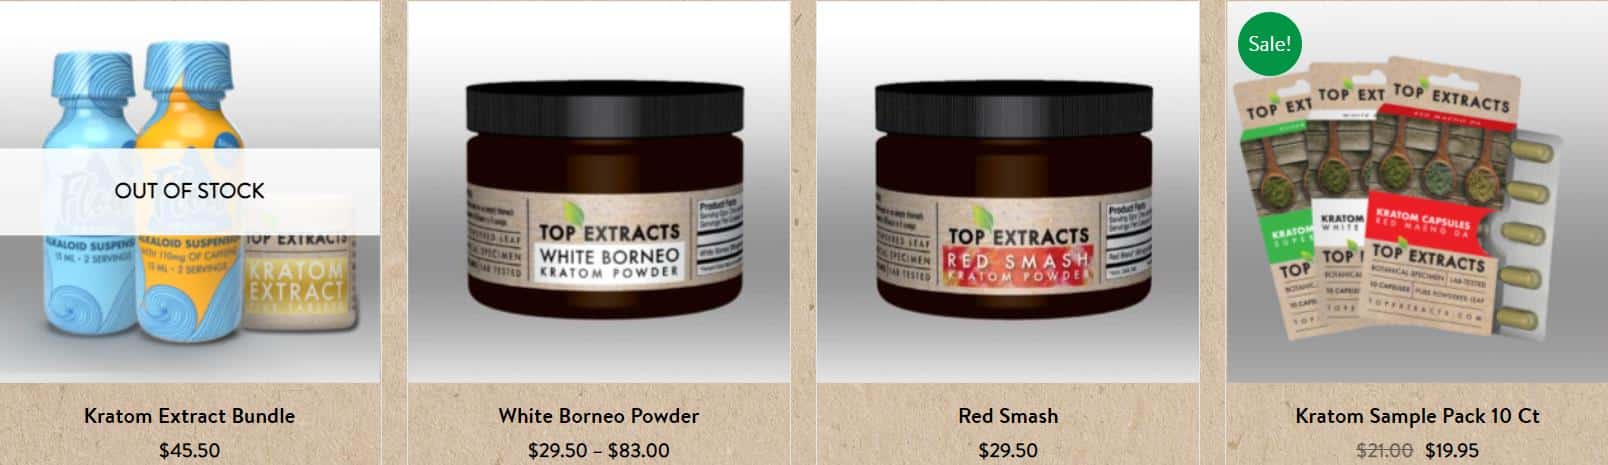 image of top kratom extracts products